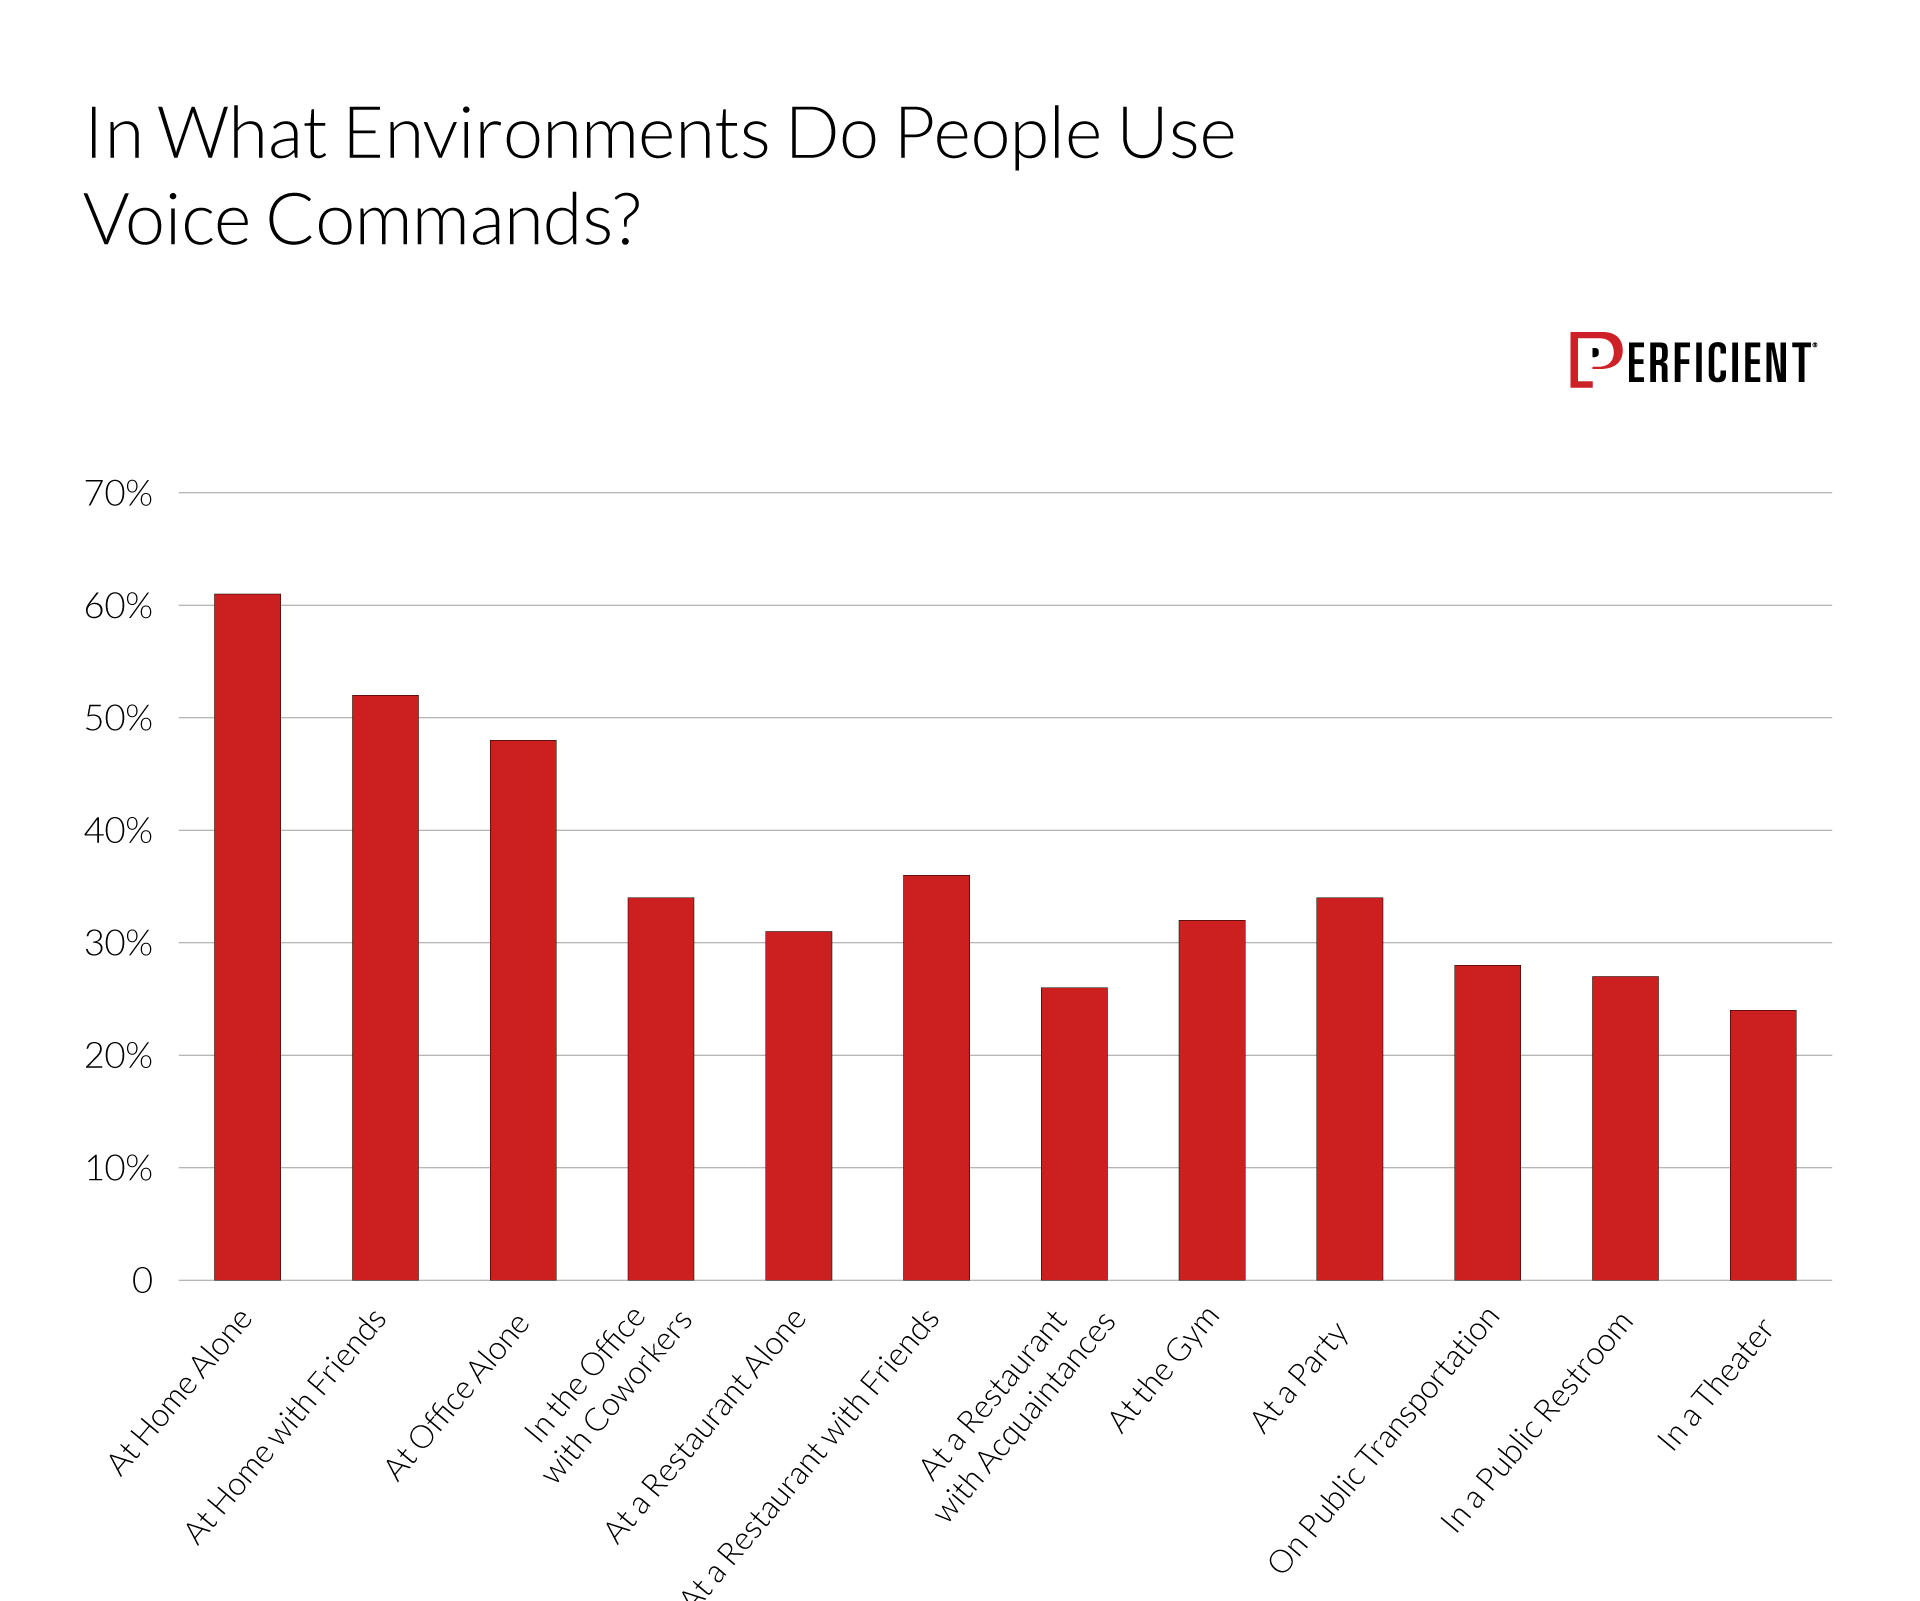 Chart shows how likely people would use voice commands in different environments